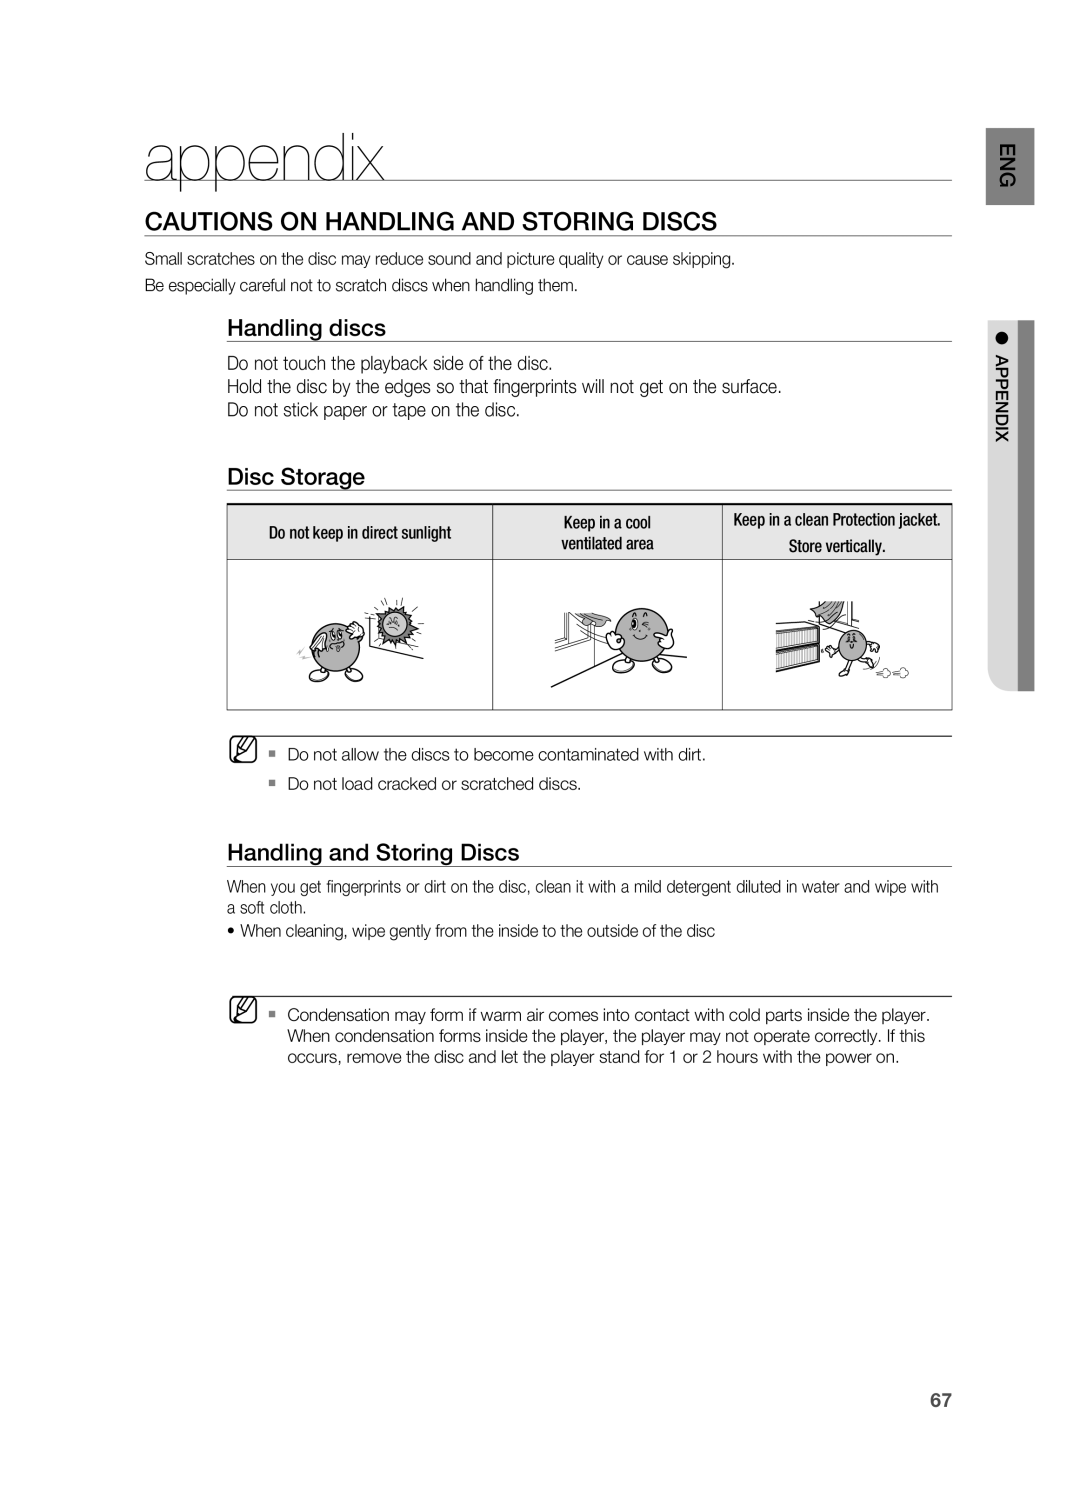 Samsung HT-BD2 manual appendix, Cautions on Handling and Storing Discs, Handling discs, Disc Storage 